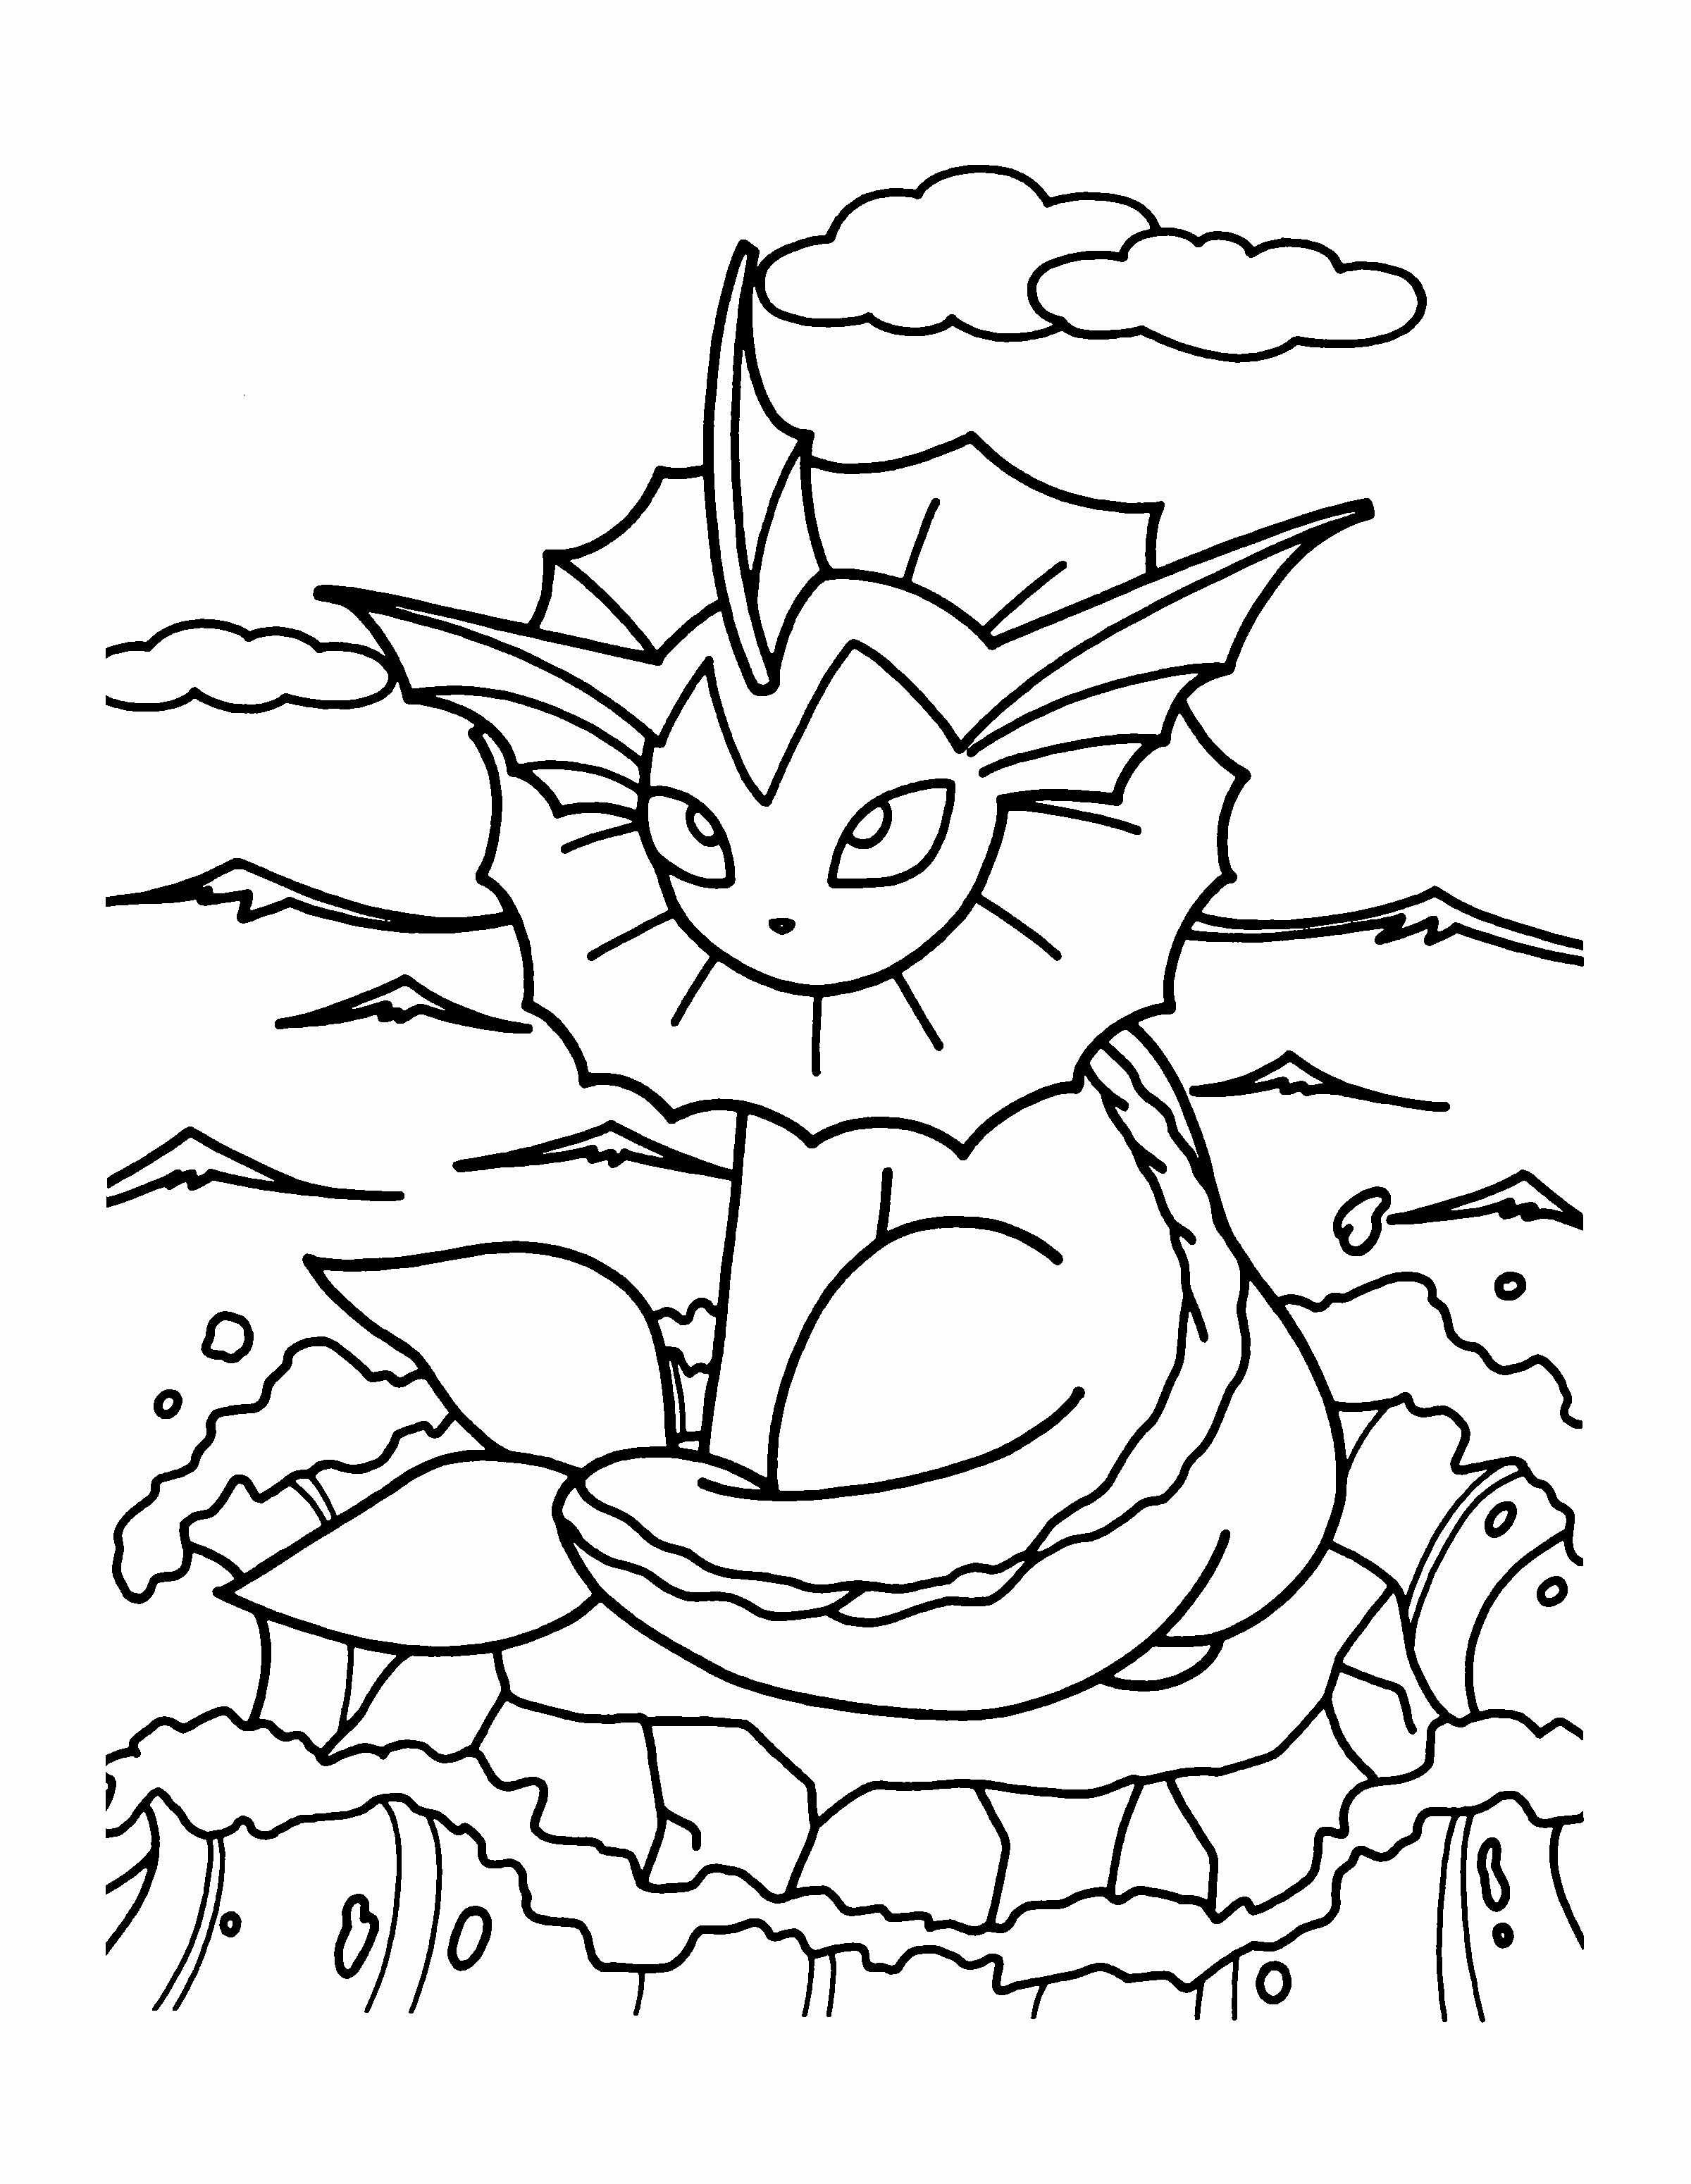 Christmas Stocking Coloring Pages For Kids at GetDrawings | Free download